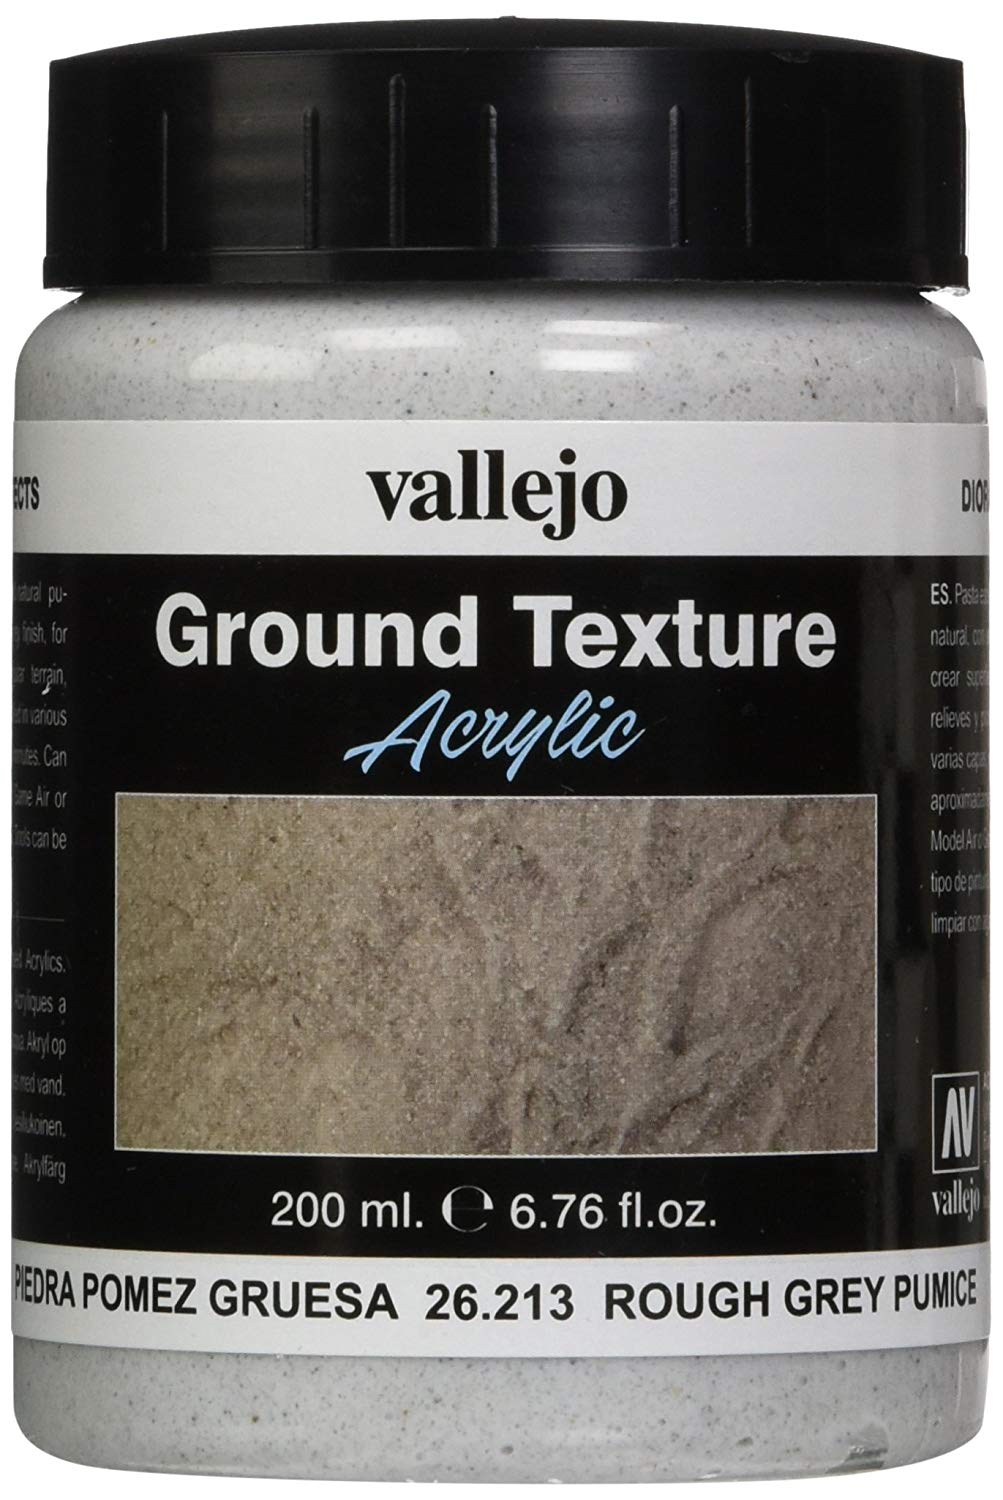 Vallejo Rough Grey Pumice, 200Ml - Painting Supplies - The Hooded Goblin